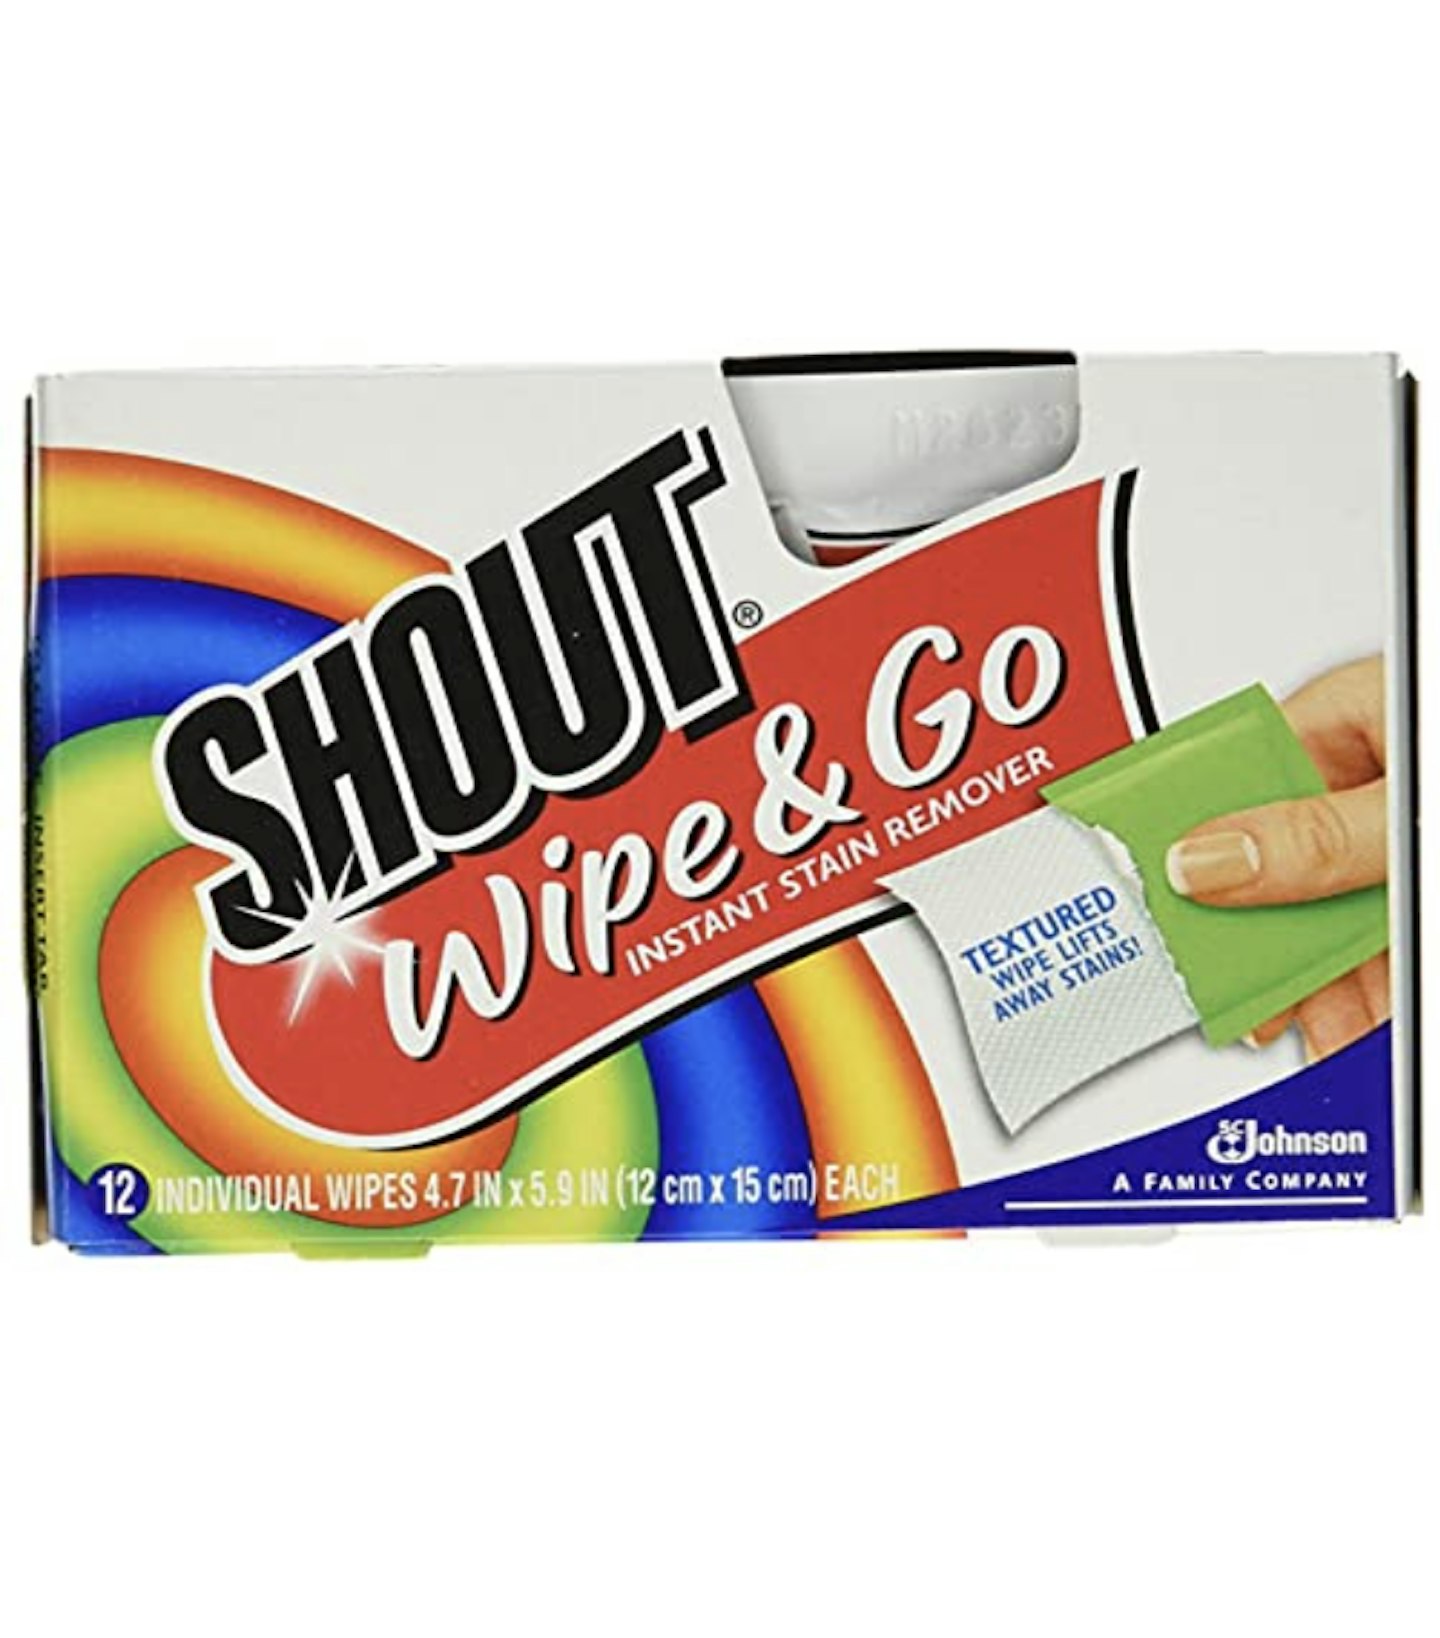 Shout Stain Remover Wipes - Pack of Three